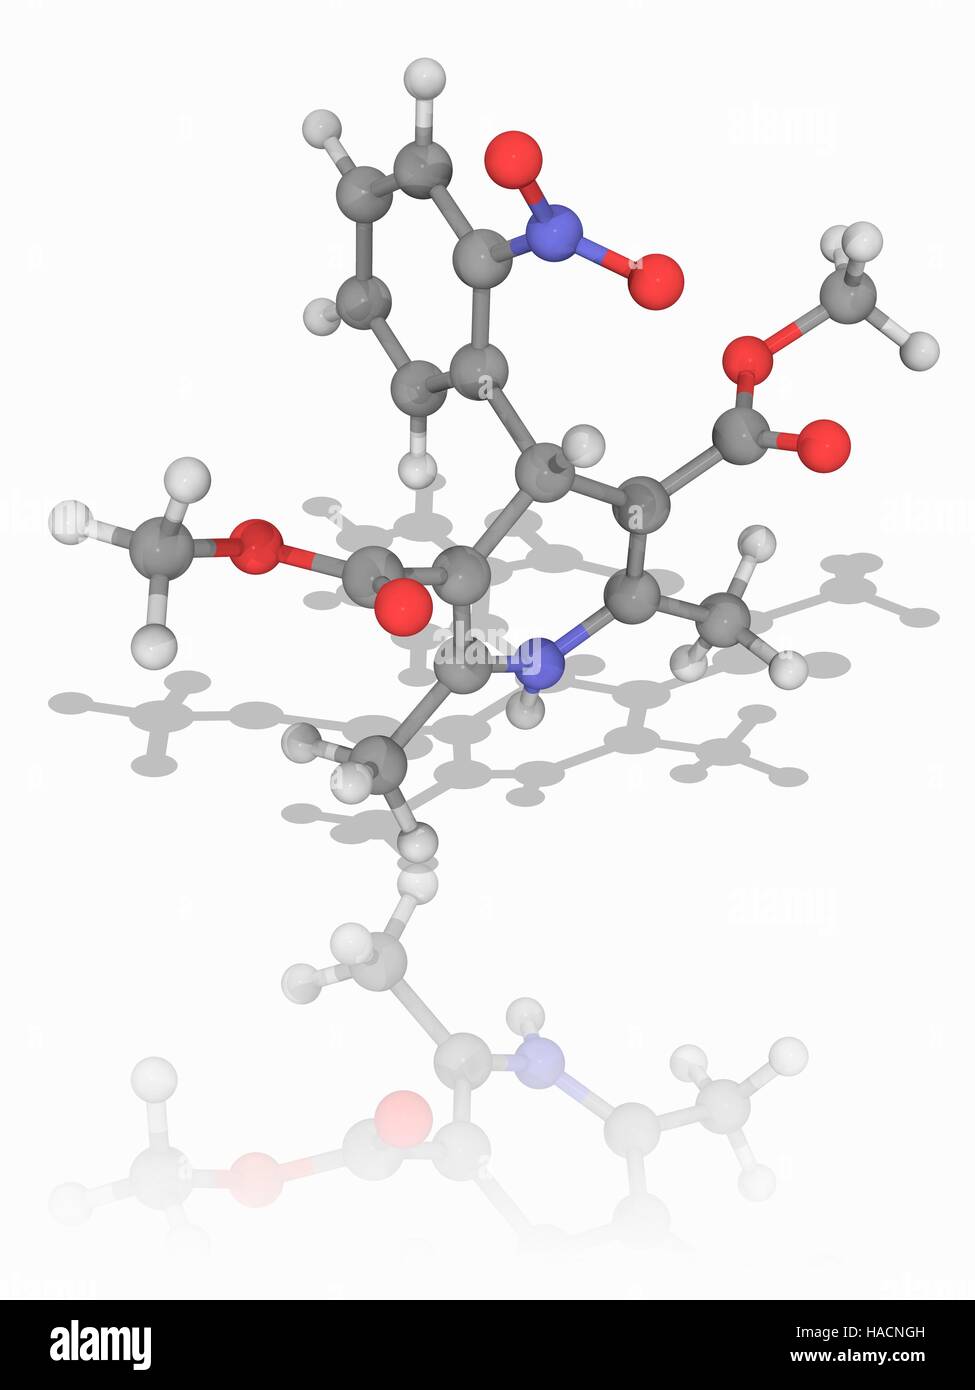 Nifedipine. Molecular model of the drug nifedipine (C17.H18.N2.O6), a dihydropyridine calcium channel blocker used to treat angina and hypertension (high blood pressure). Atoms are represented as spheres and are colour-coded: carbon (grey), hydrogen (white), nitrogen (blue) and oxygen (red). Illustration. Stock Photo